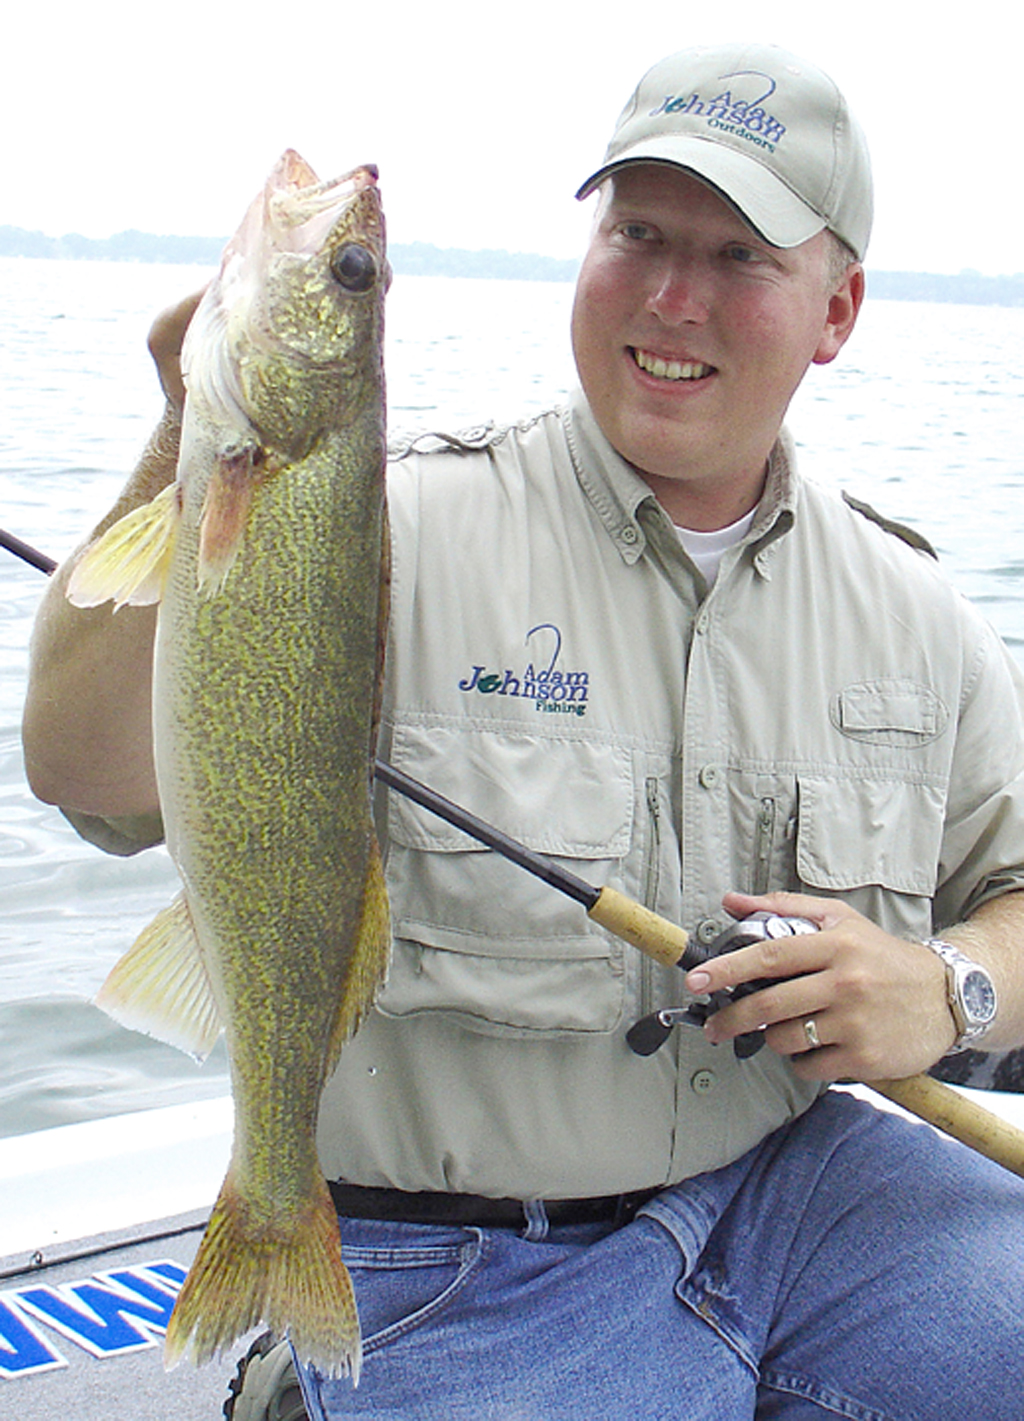 Top Spots for Minnesota Fishing in 2012